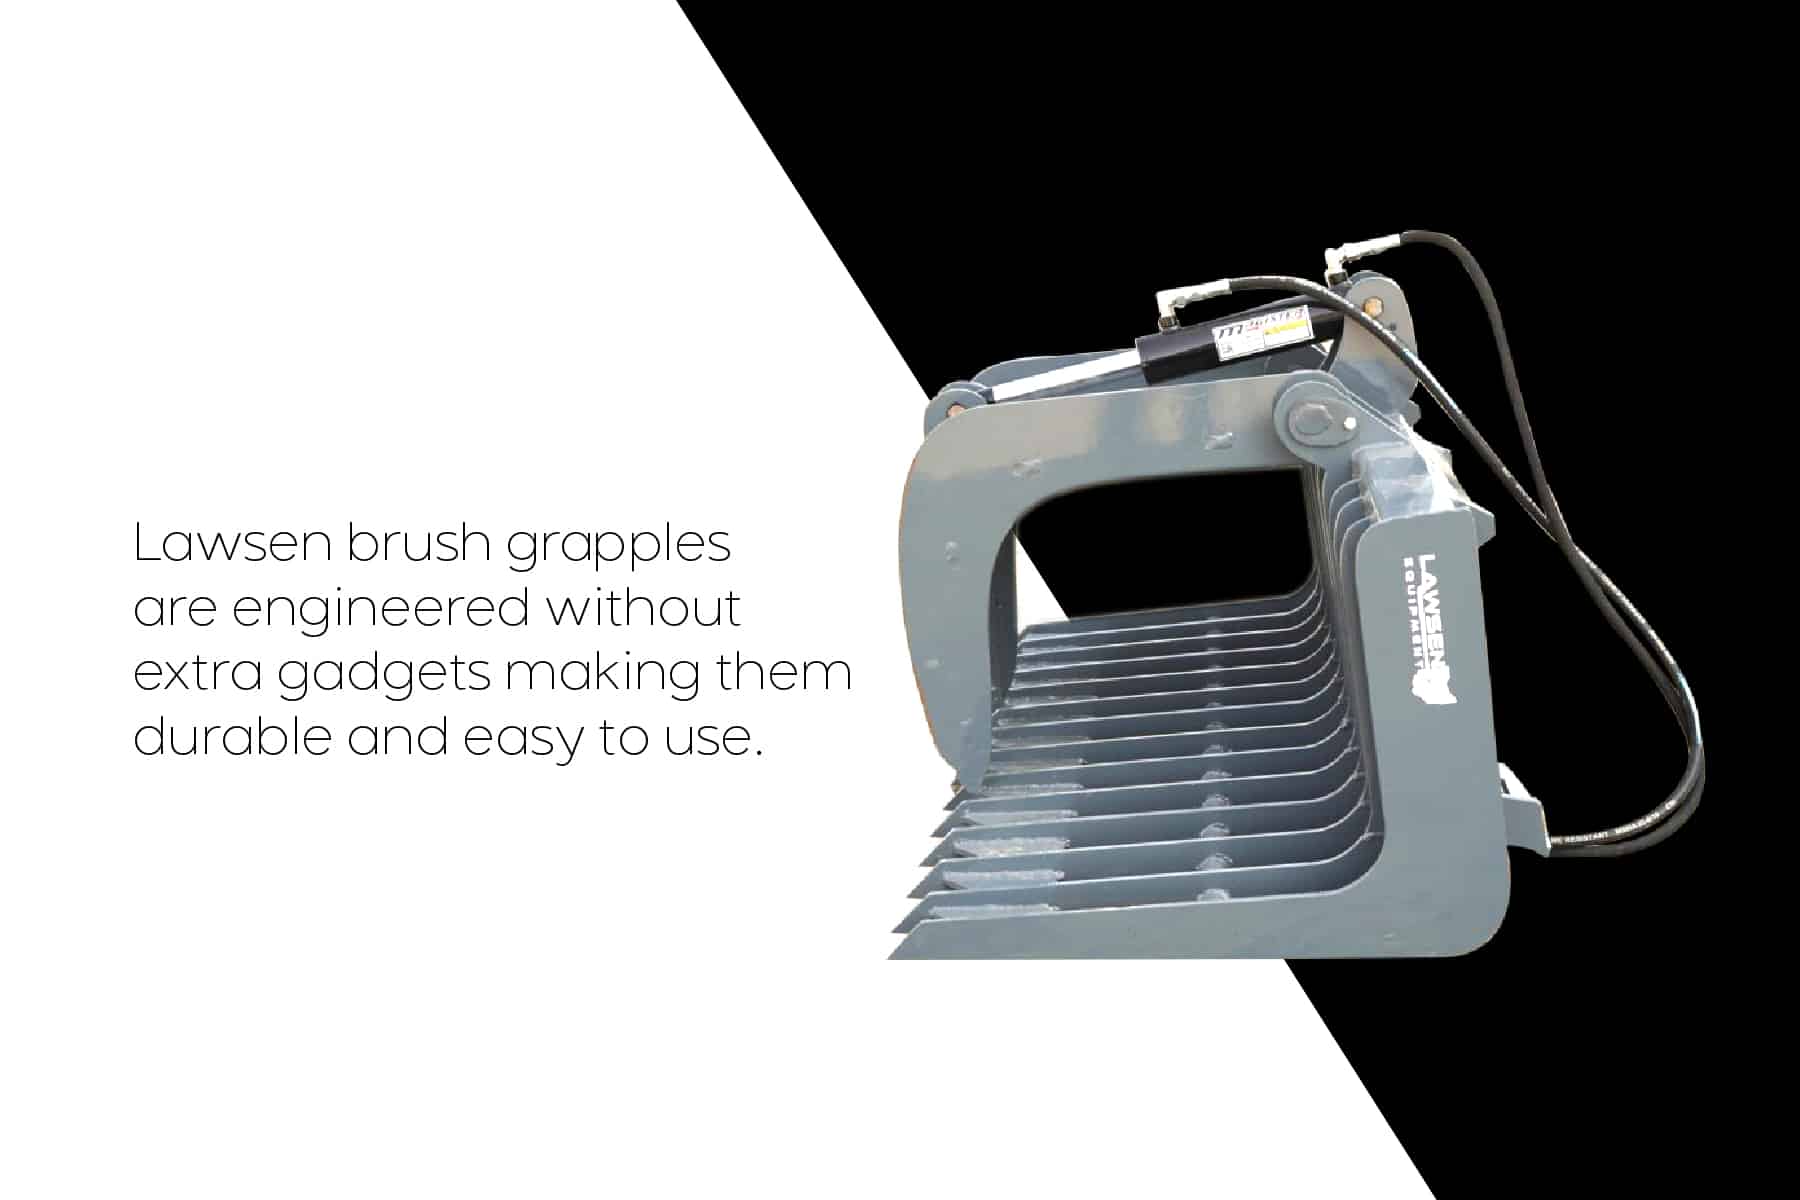 graphic about Lawsen brush grapples